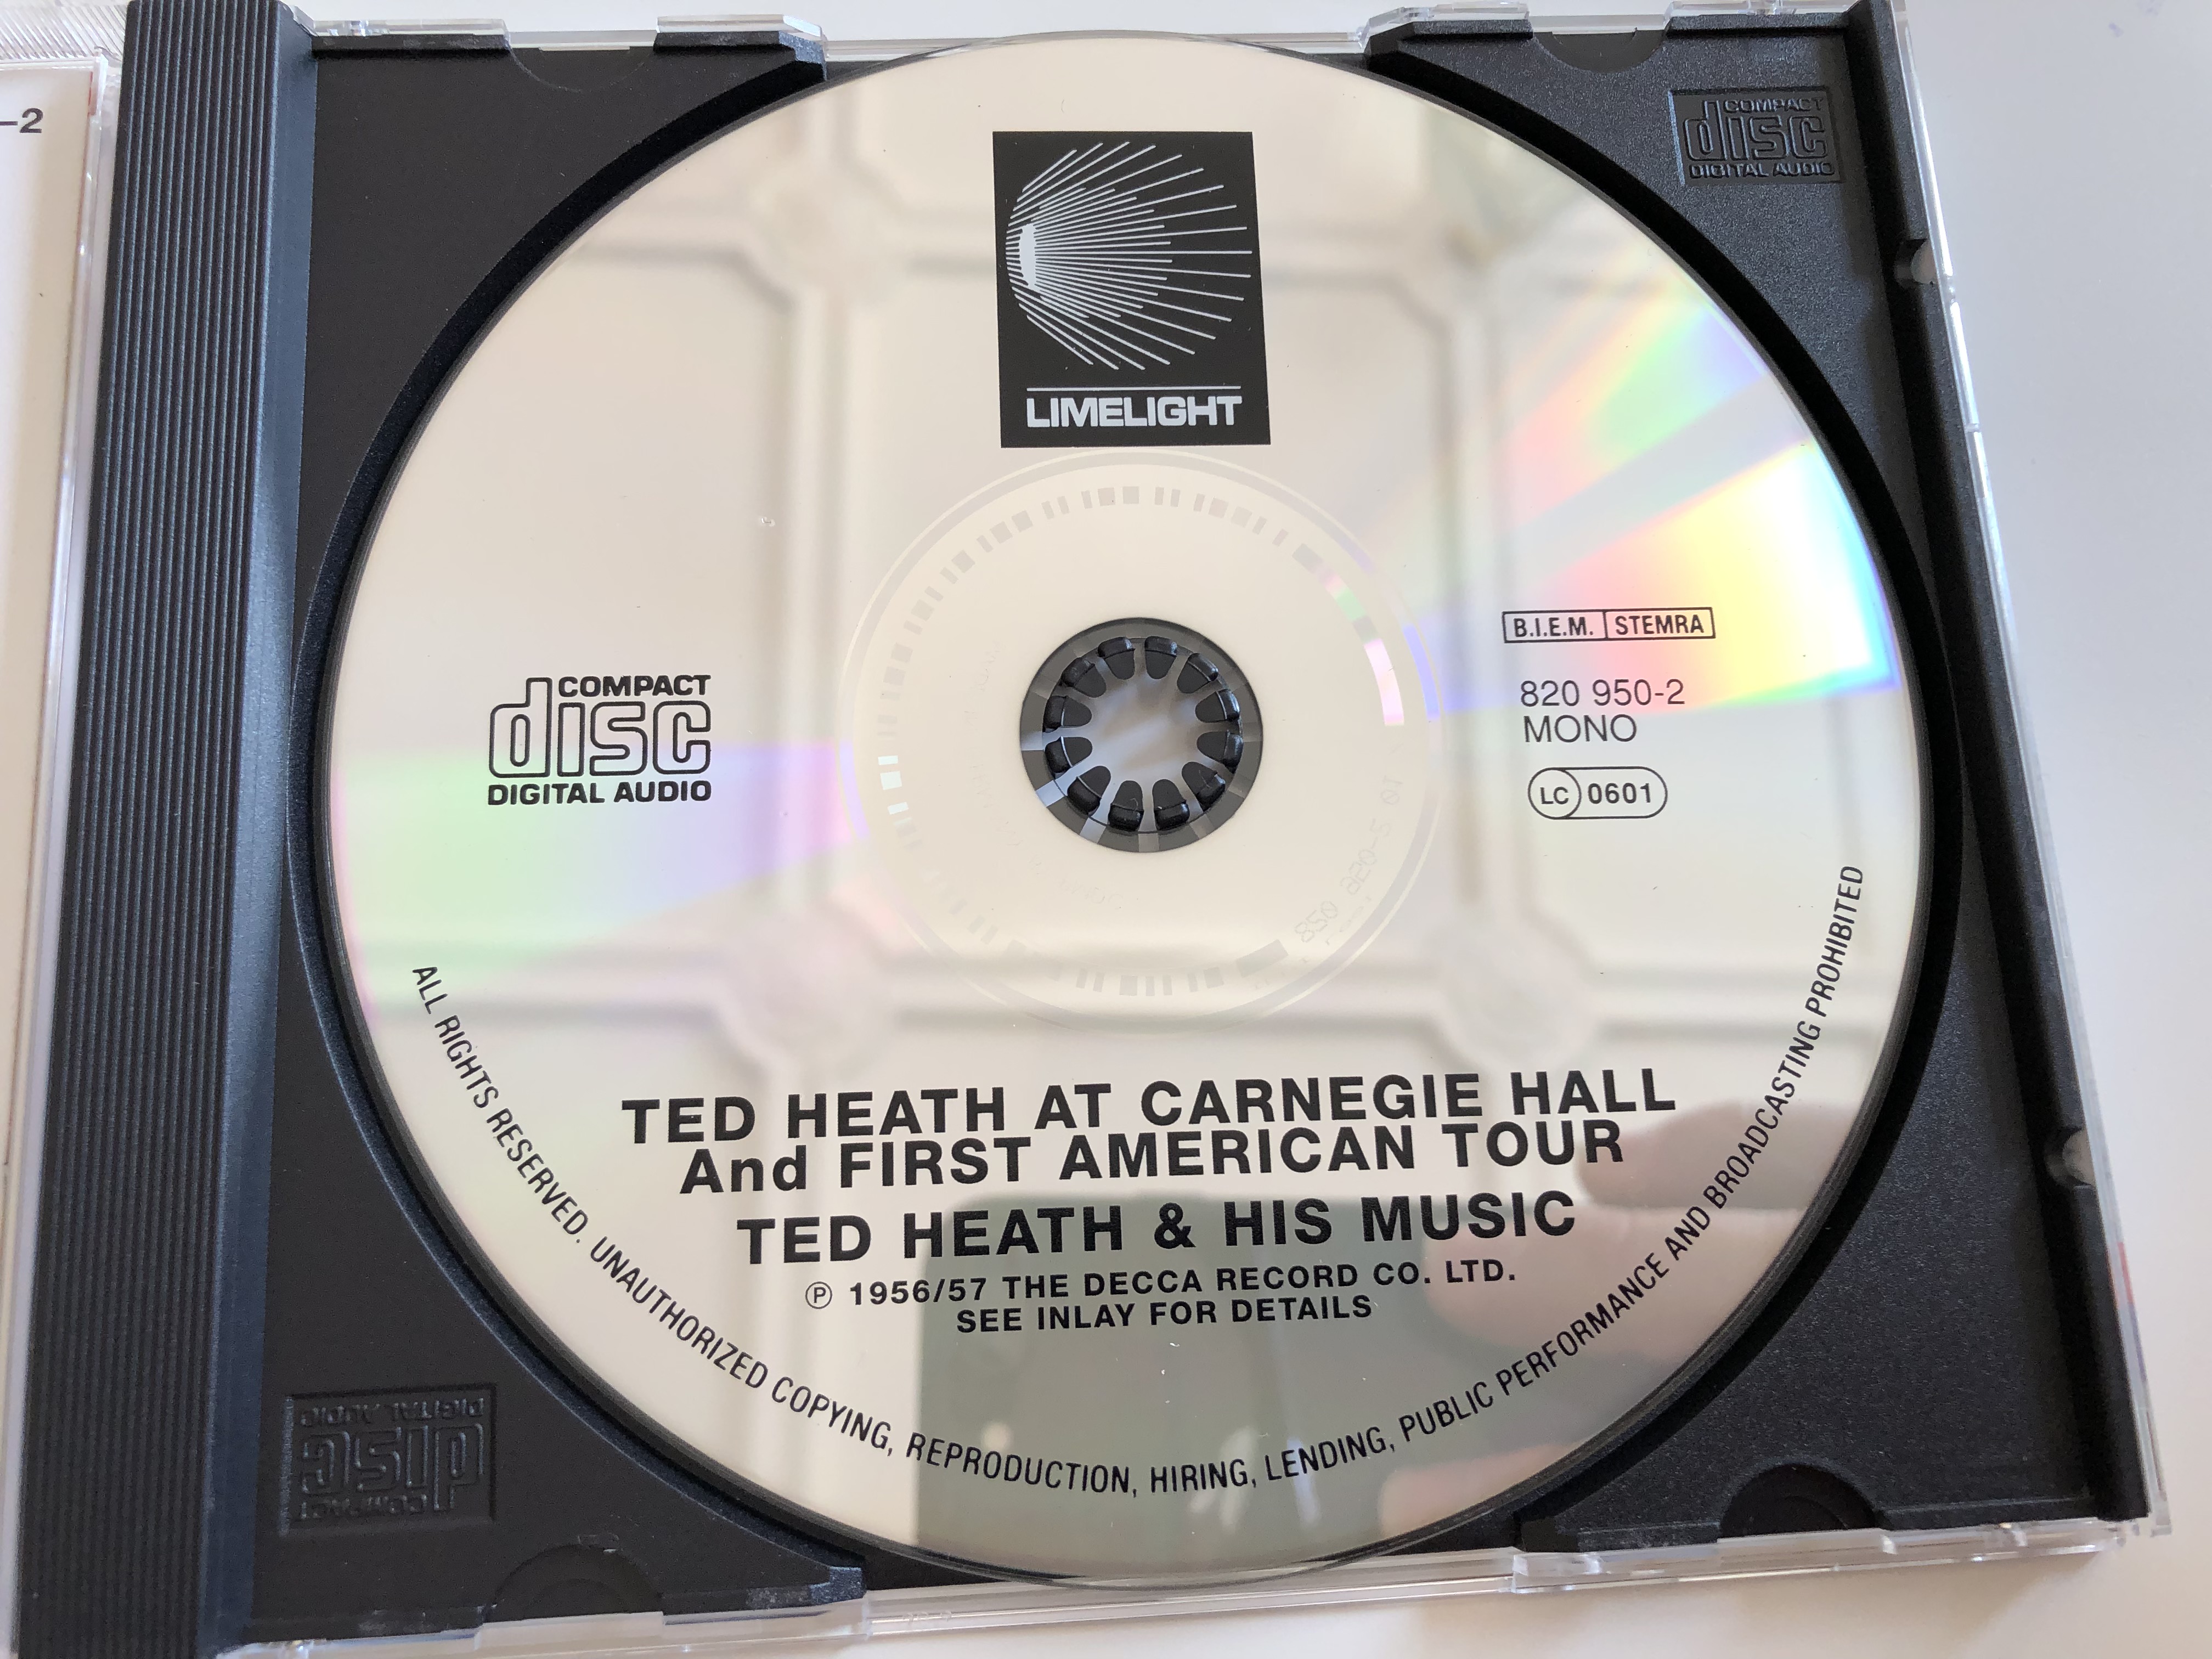 ted-heath-at-carnegie-hall-and-first-american-tour-ted-heath-his-music-limelight-audio-cd-820-950-2-3-.jpg